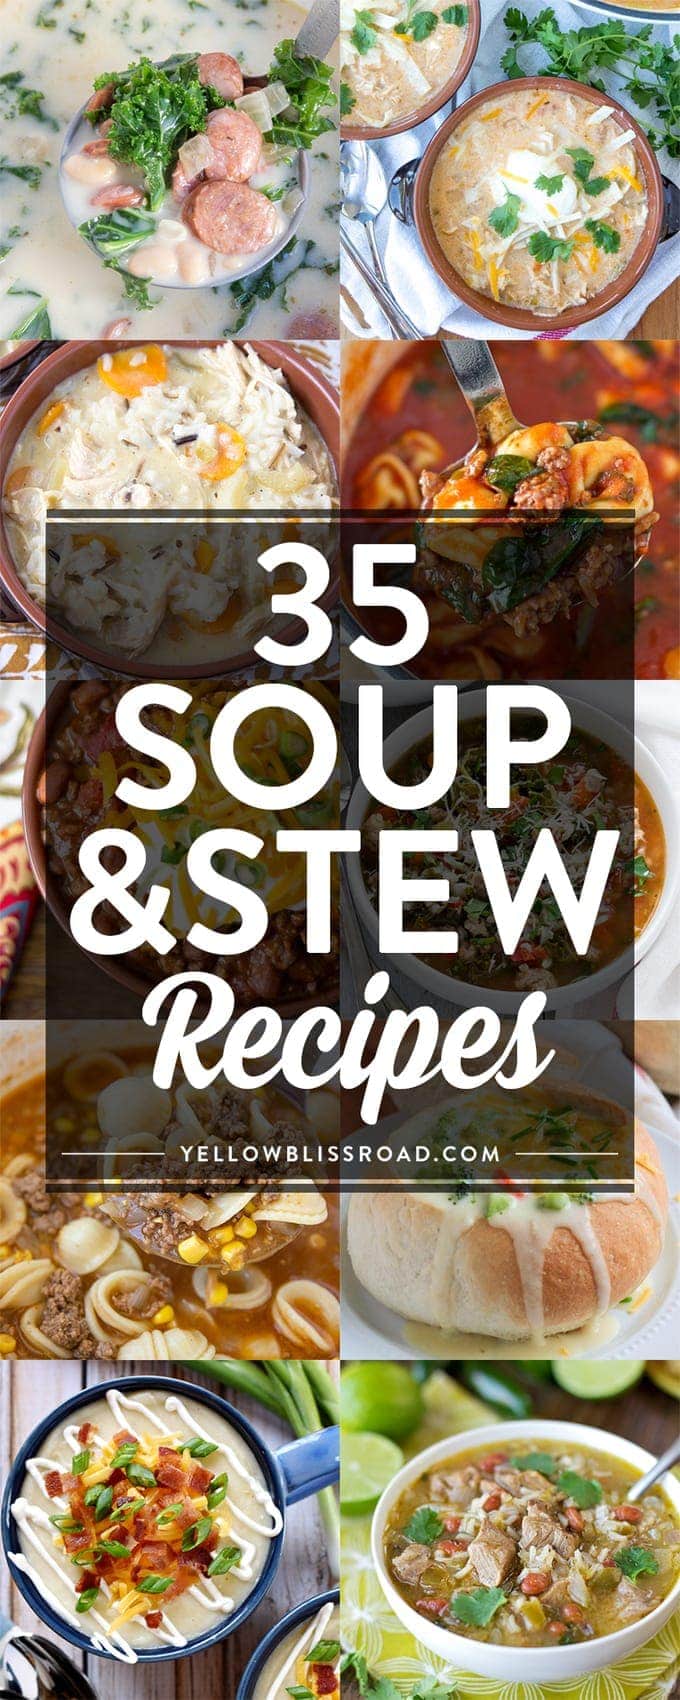 https://www.yellowblissroad.com/wp-content/uploads/2015/01/35-Soup-and-Stew-Recipes-to-warm-you-up-this-winter.jpg